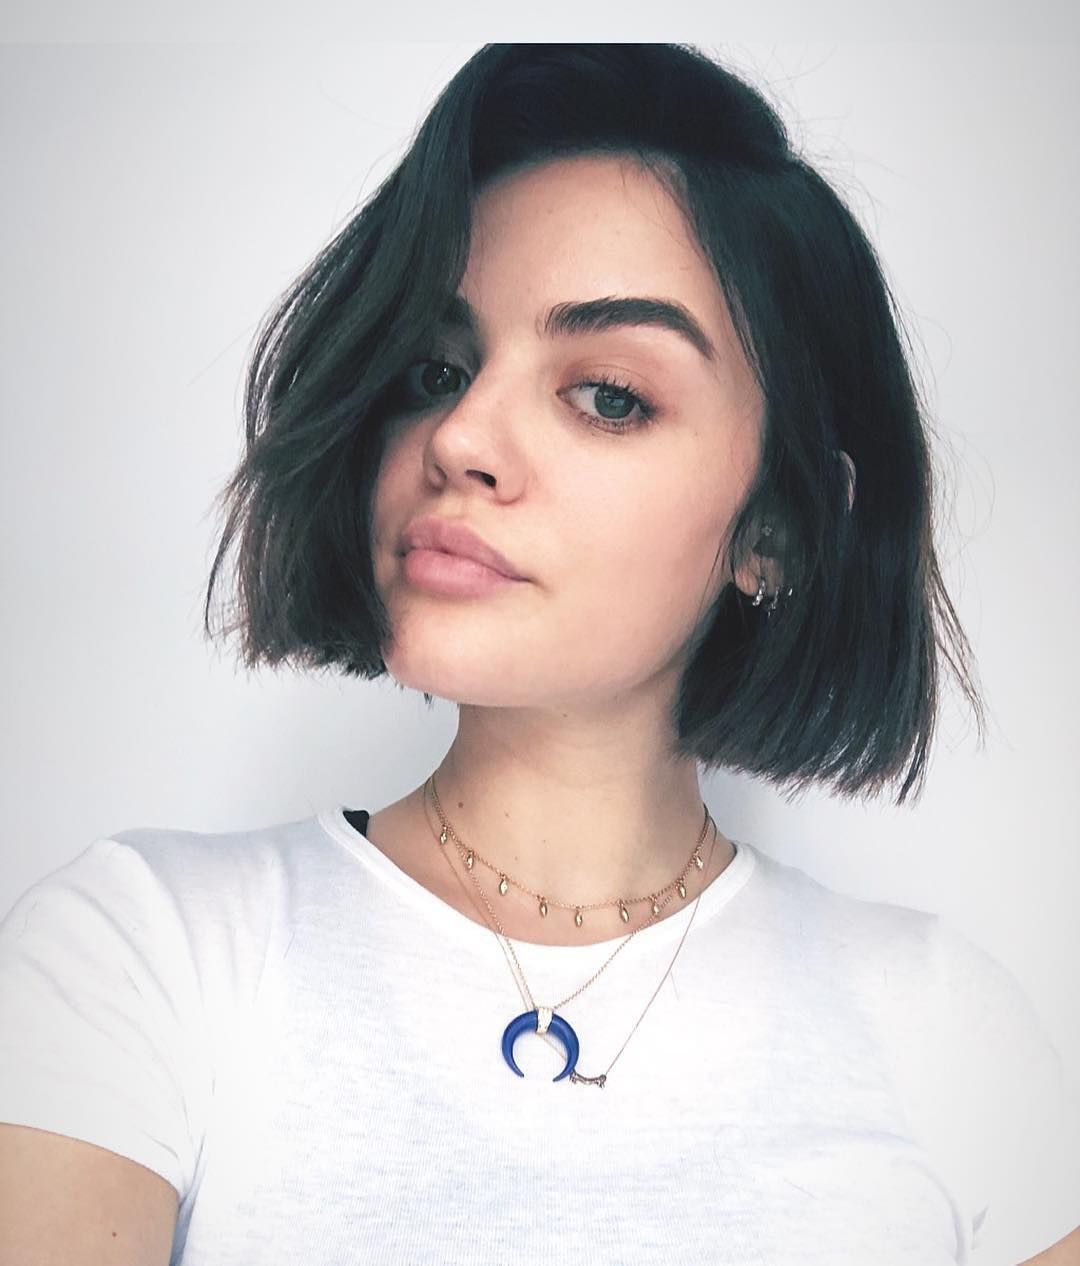 Bob Haircuts 2018: 16 Celebrities Who Prove That 2018 Is Officially the Year of the Bob -   14 lucy hale hair Short ideas